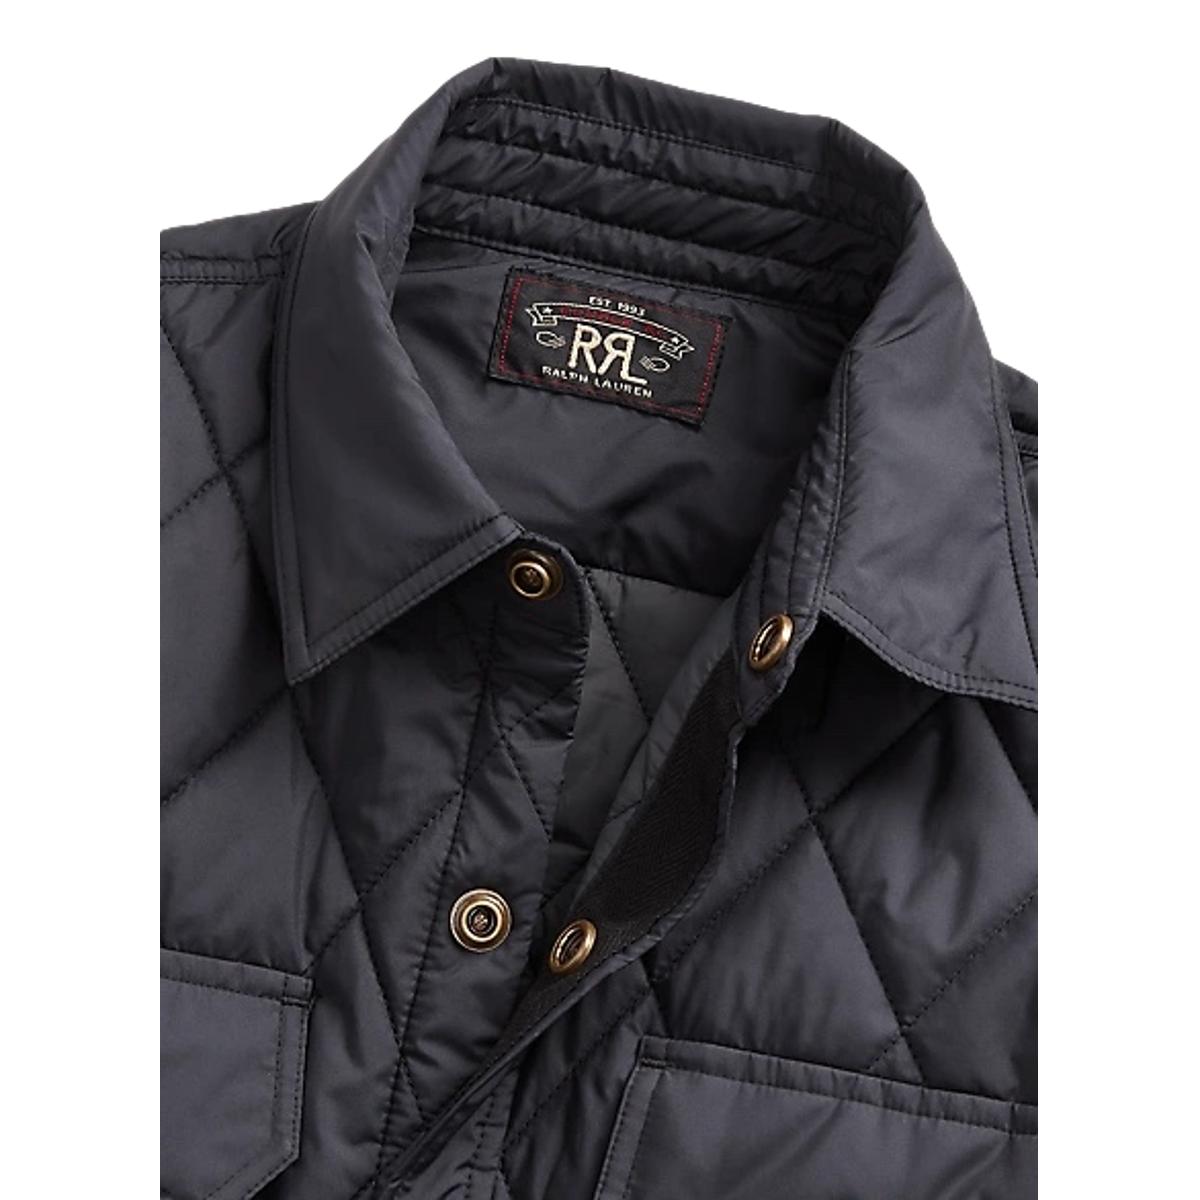 Quilted Shirt Jacket Polo Black - Jacket